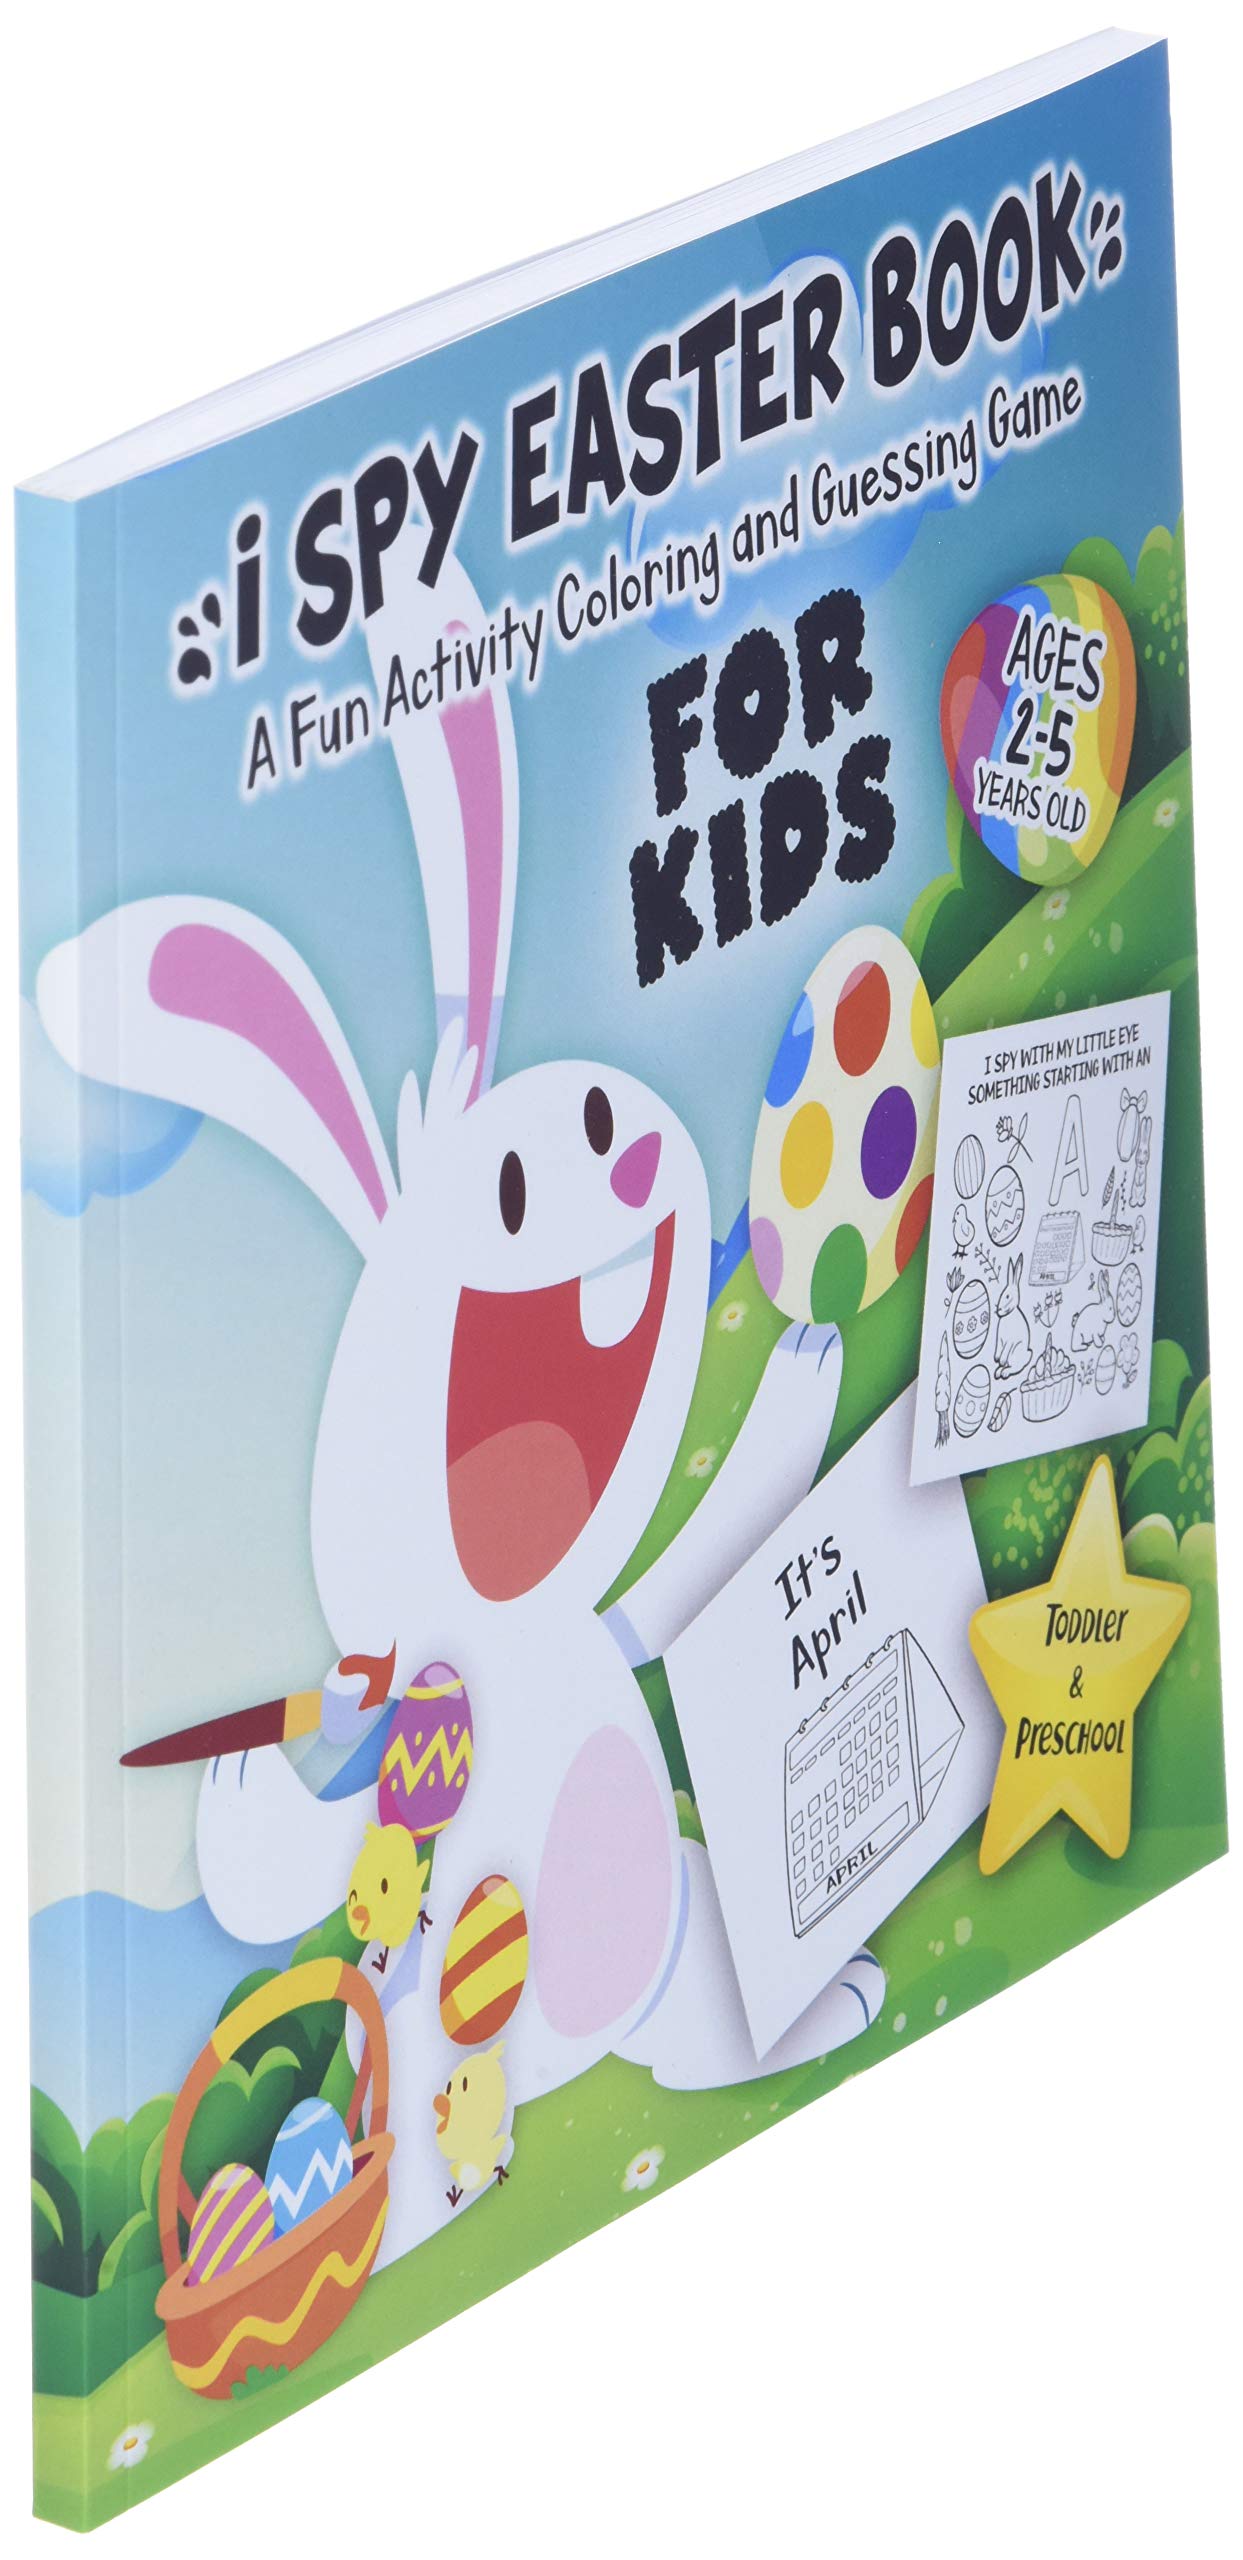 I Spy Easter Book for Kids Ages 2-5: A Fun Activity Happy Easter Things and Other Cute Stuff Coloring and Guessing Game for Kids, Toddler and Preschool